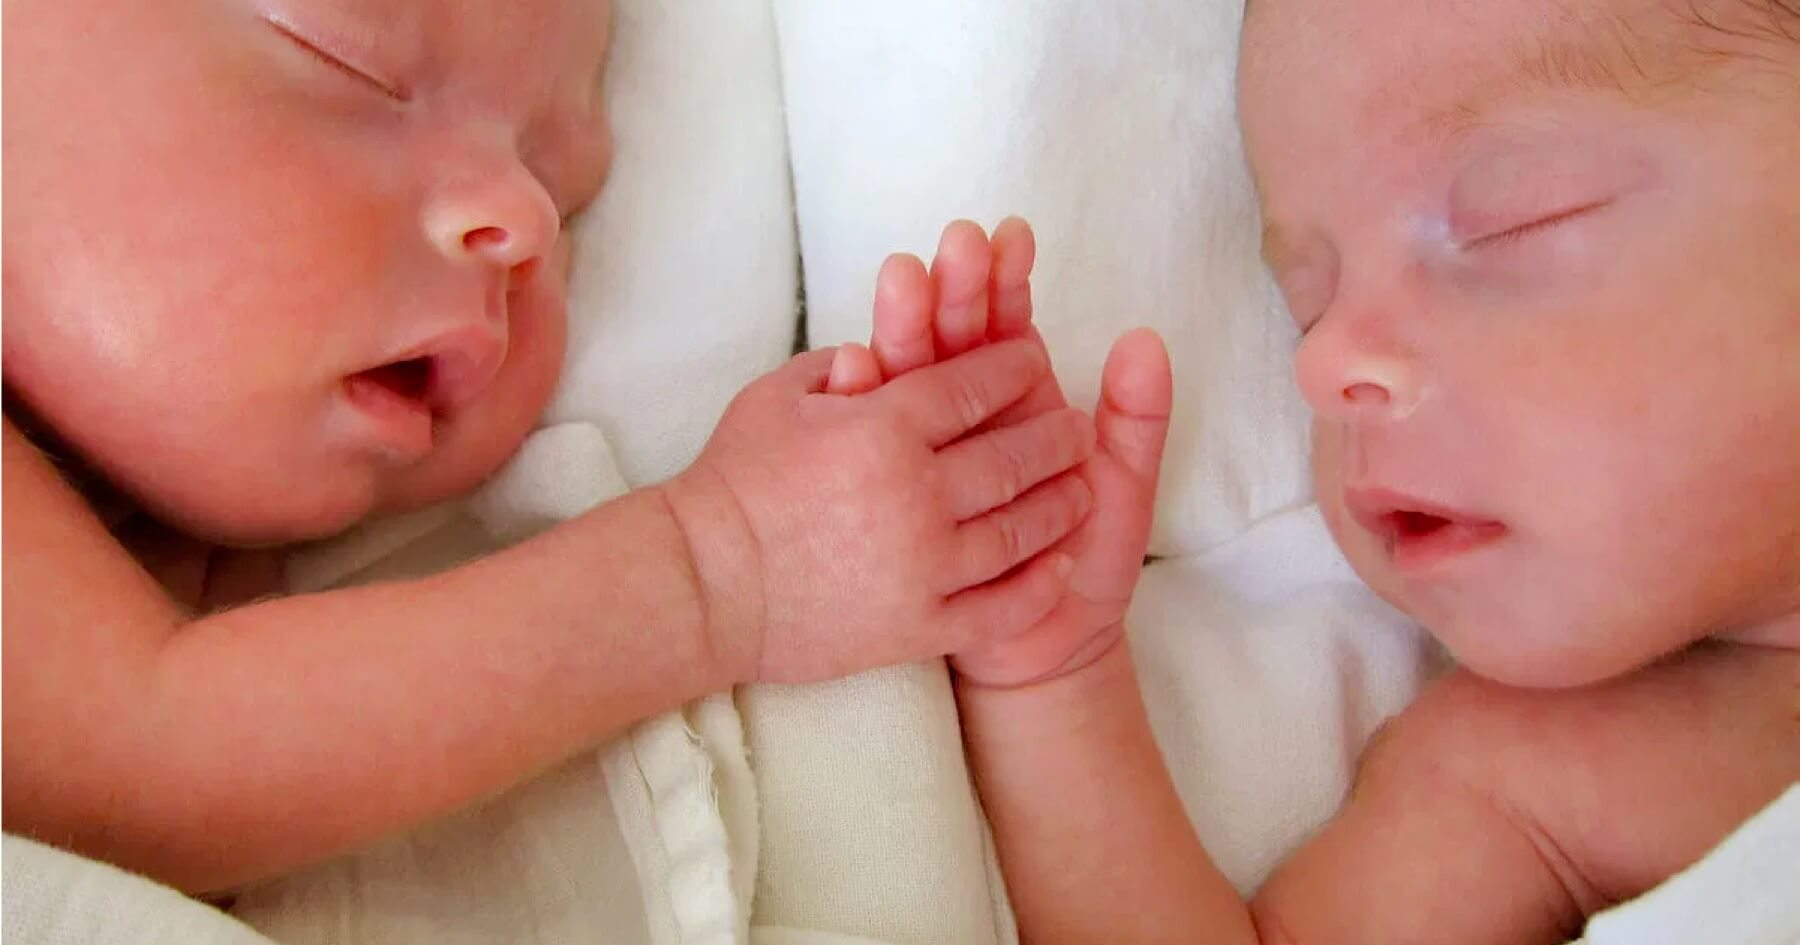 55 twins or triplets selectively reduced by abortion in first half of 2020